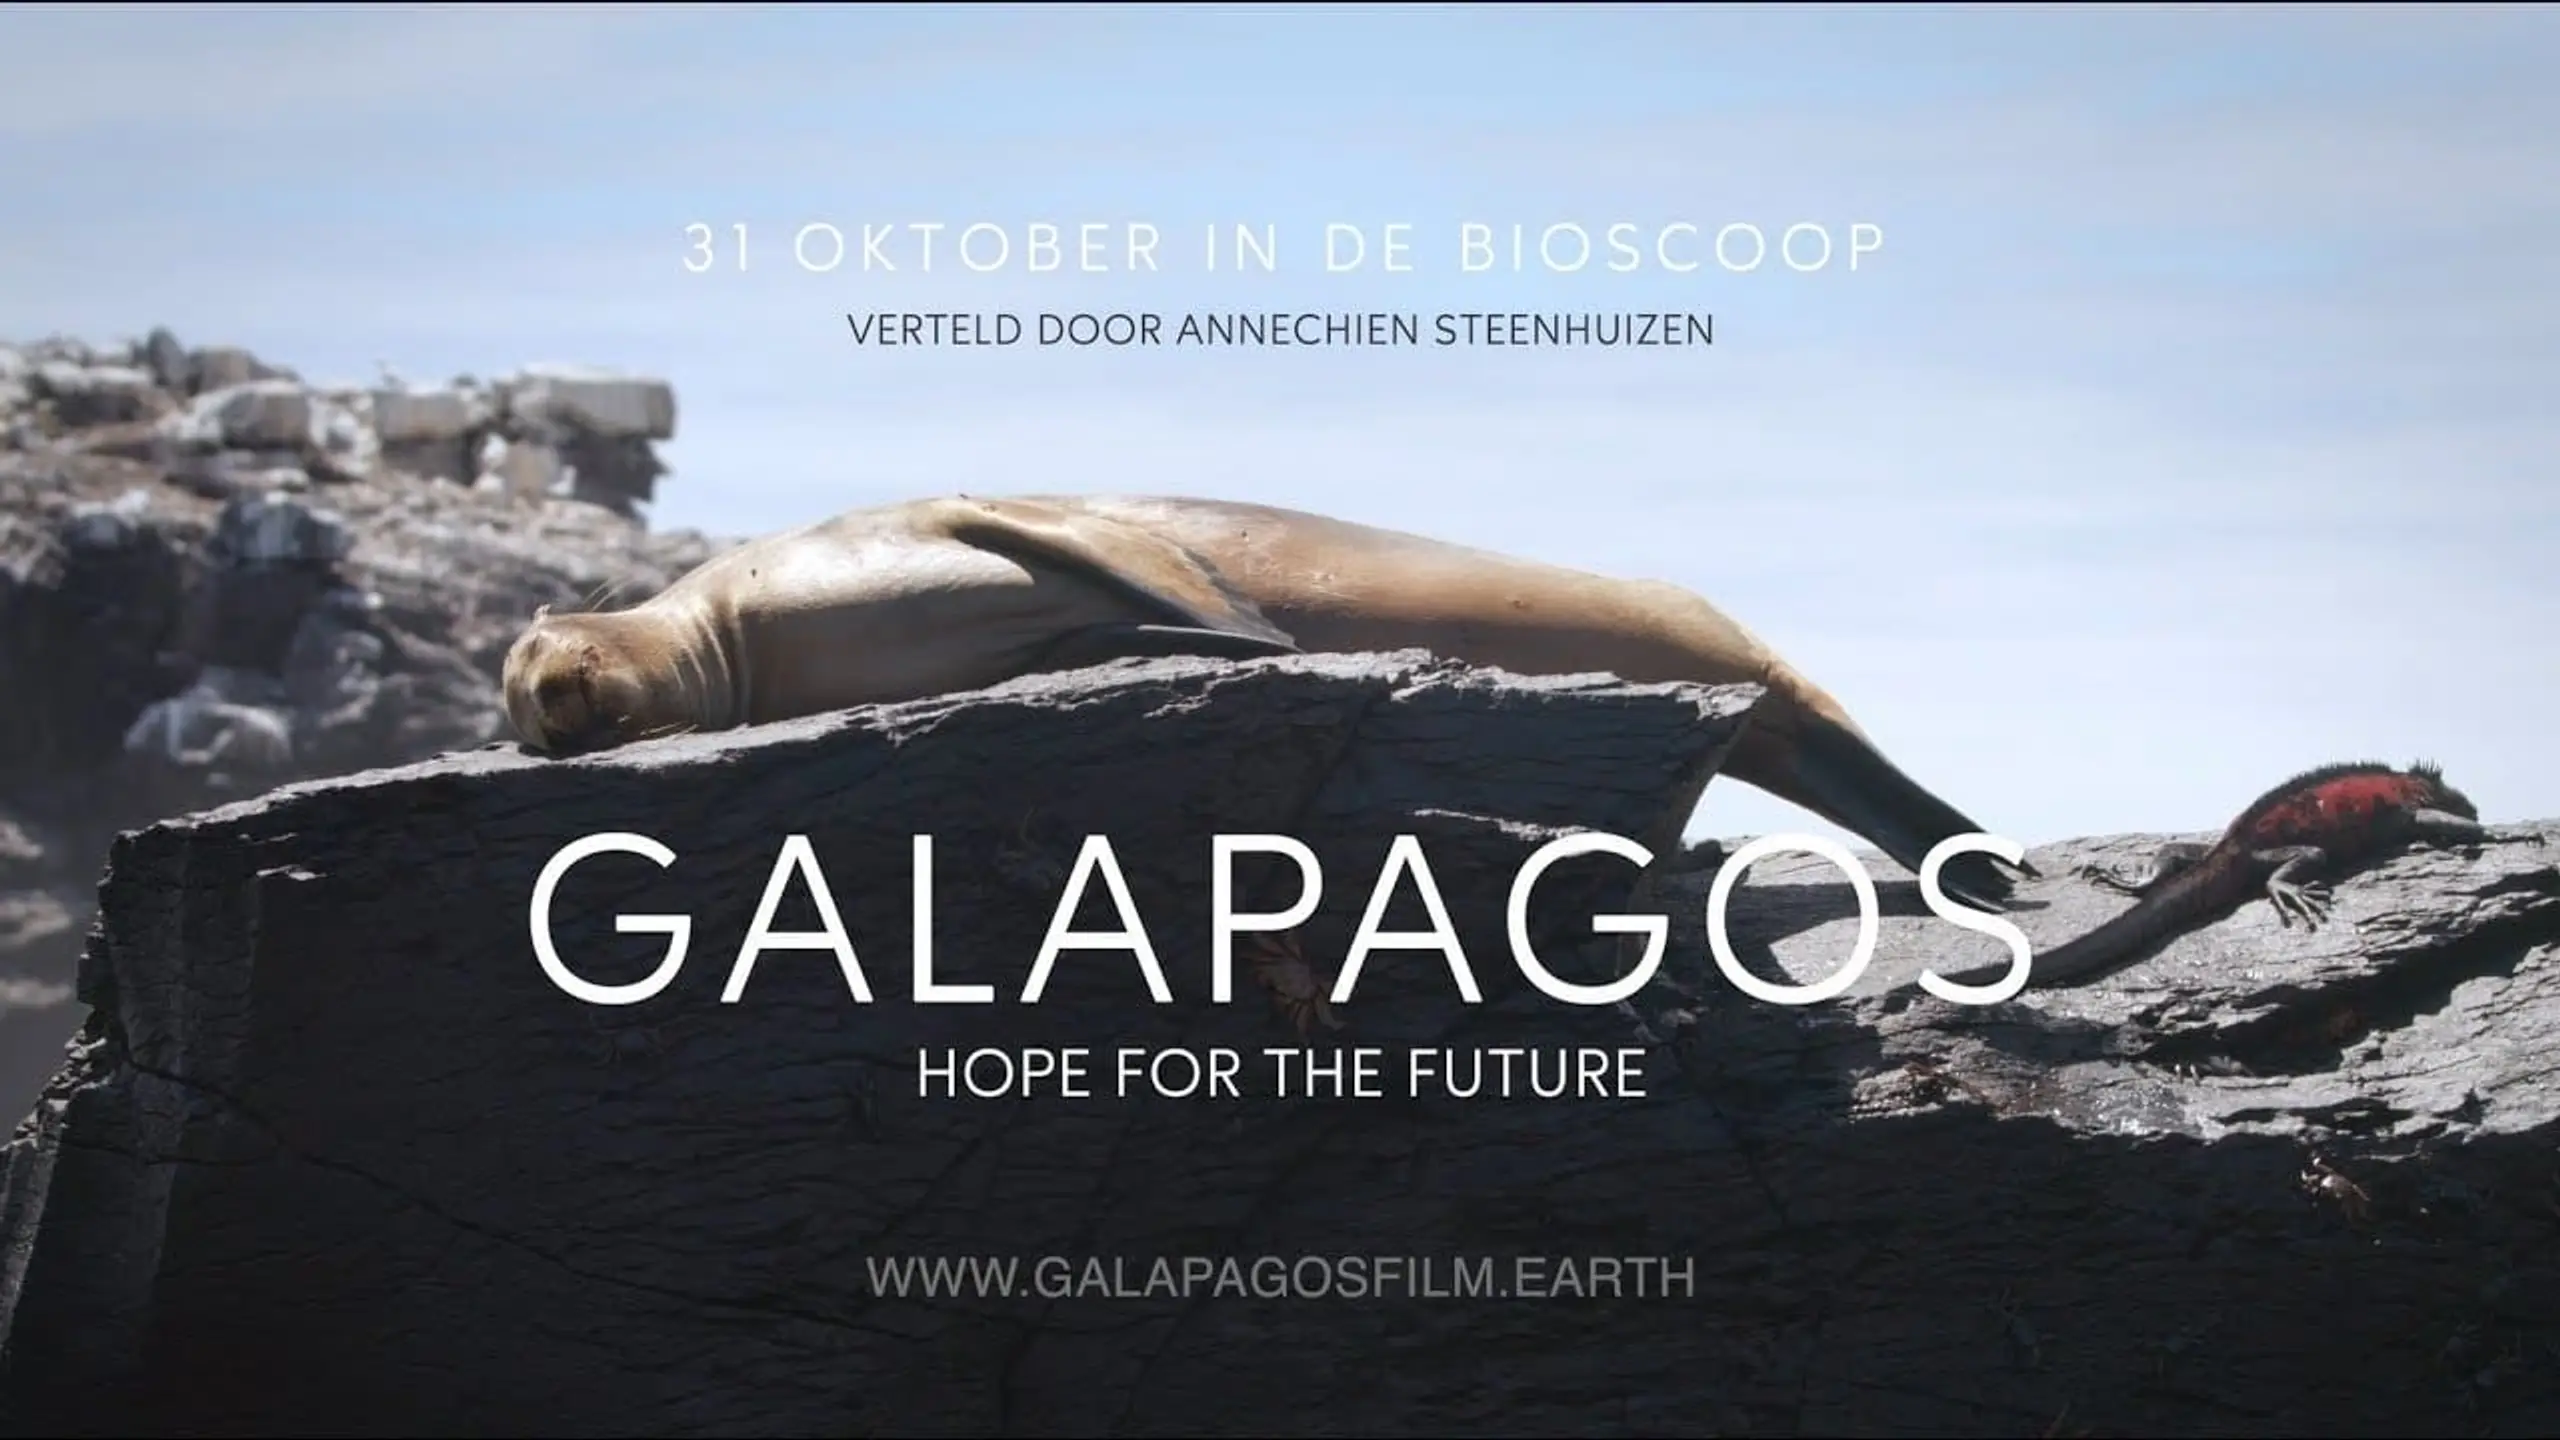 Galapagos: Hope for the Future